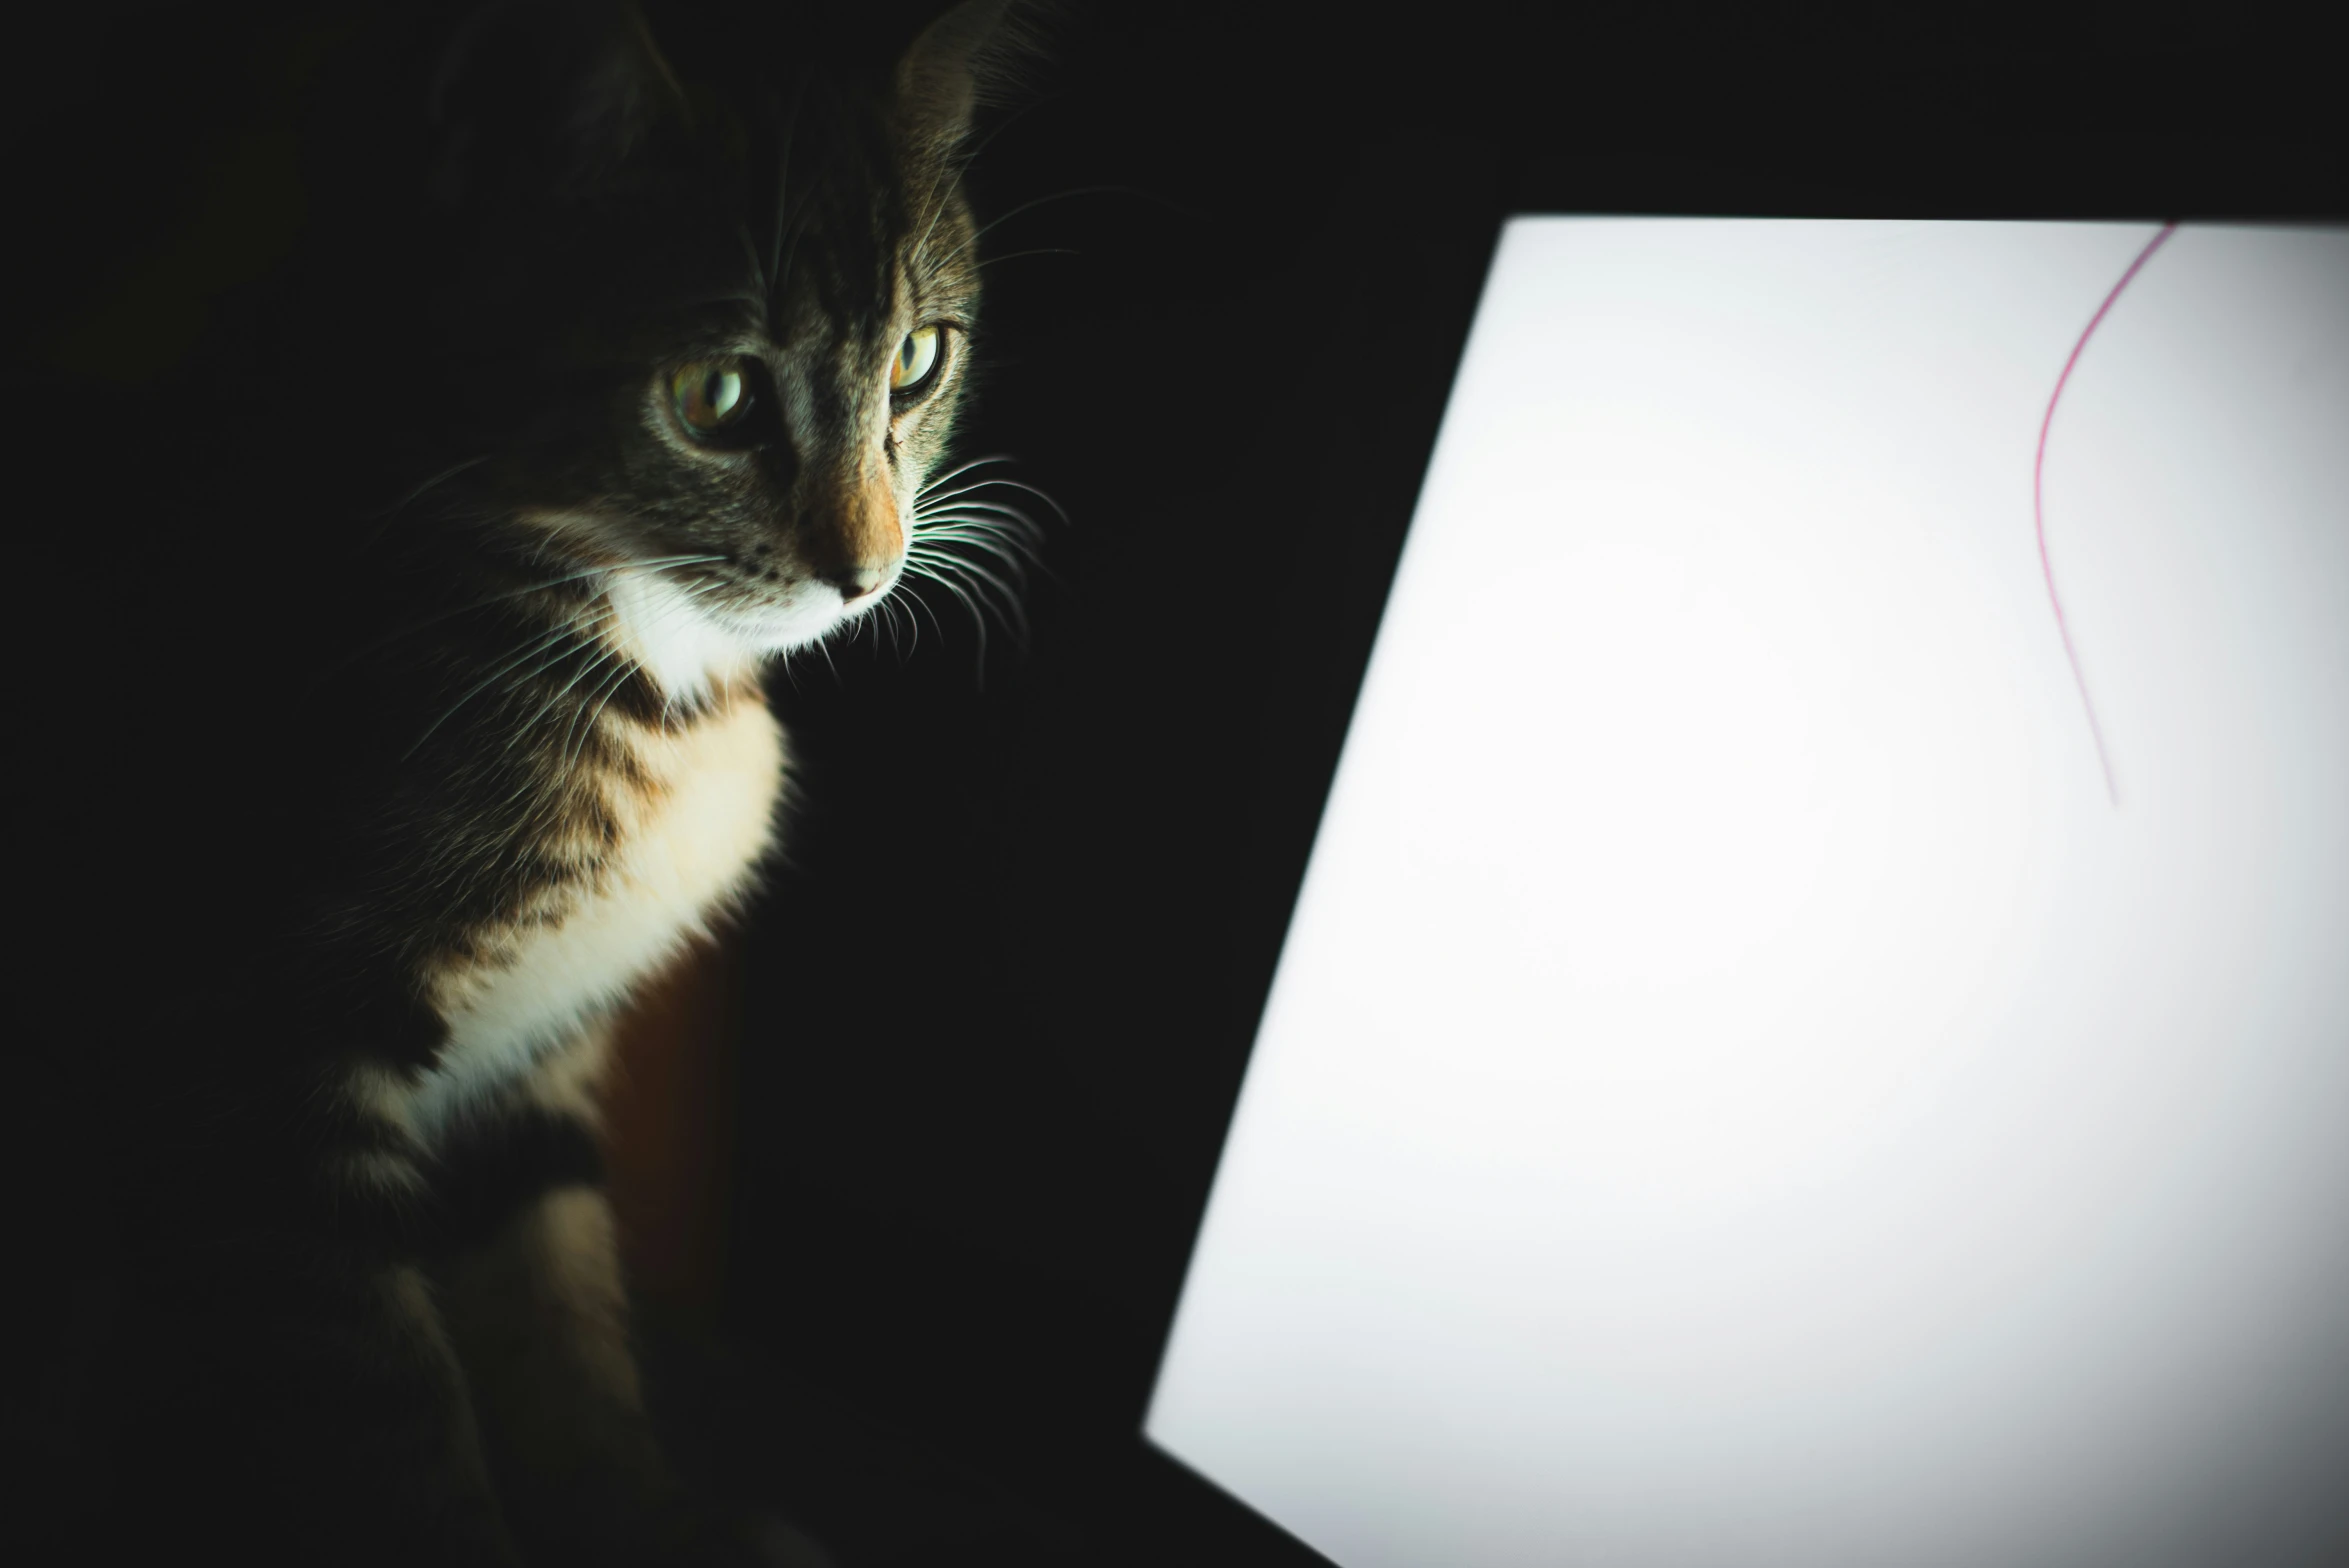 a cat sitting in the darkness by a computer screen